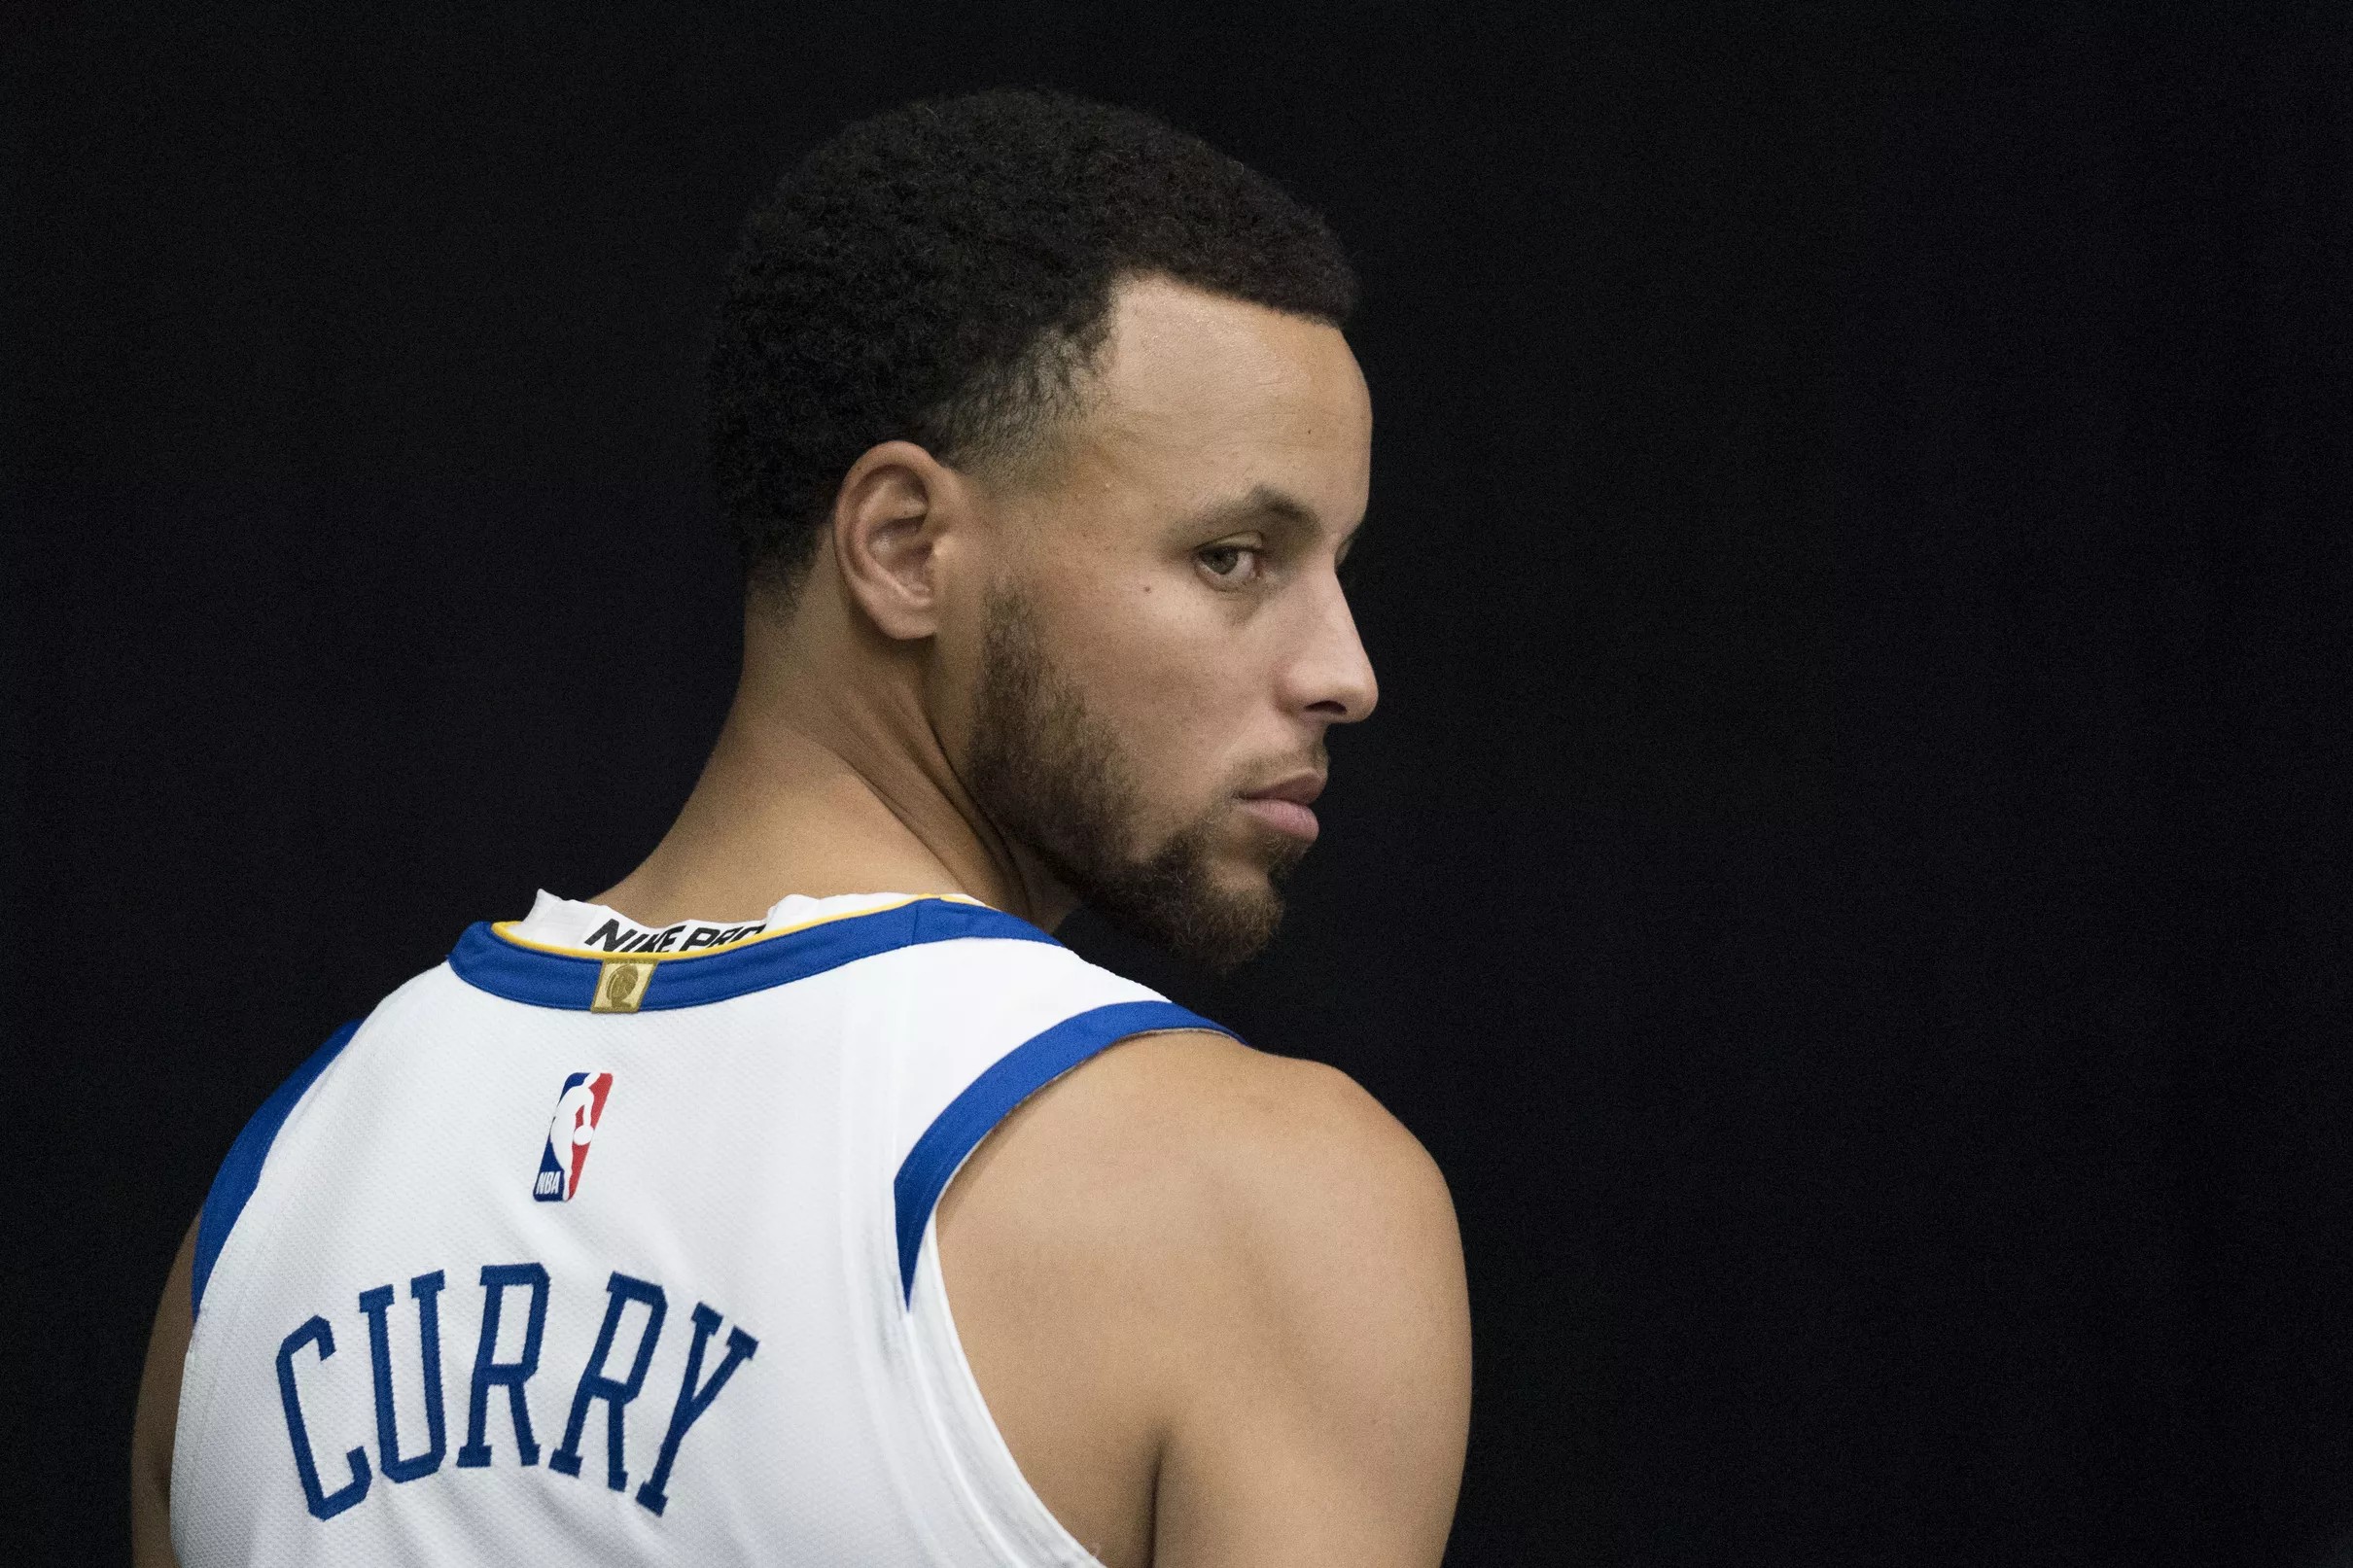 Player perspective: Looking back at how Steph Curry’s usage has evolved